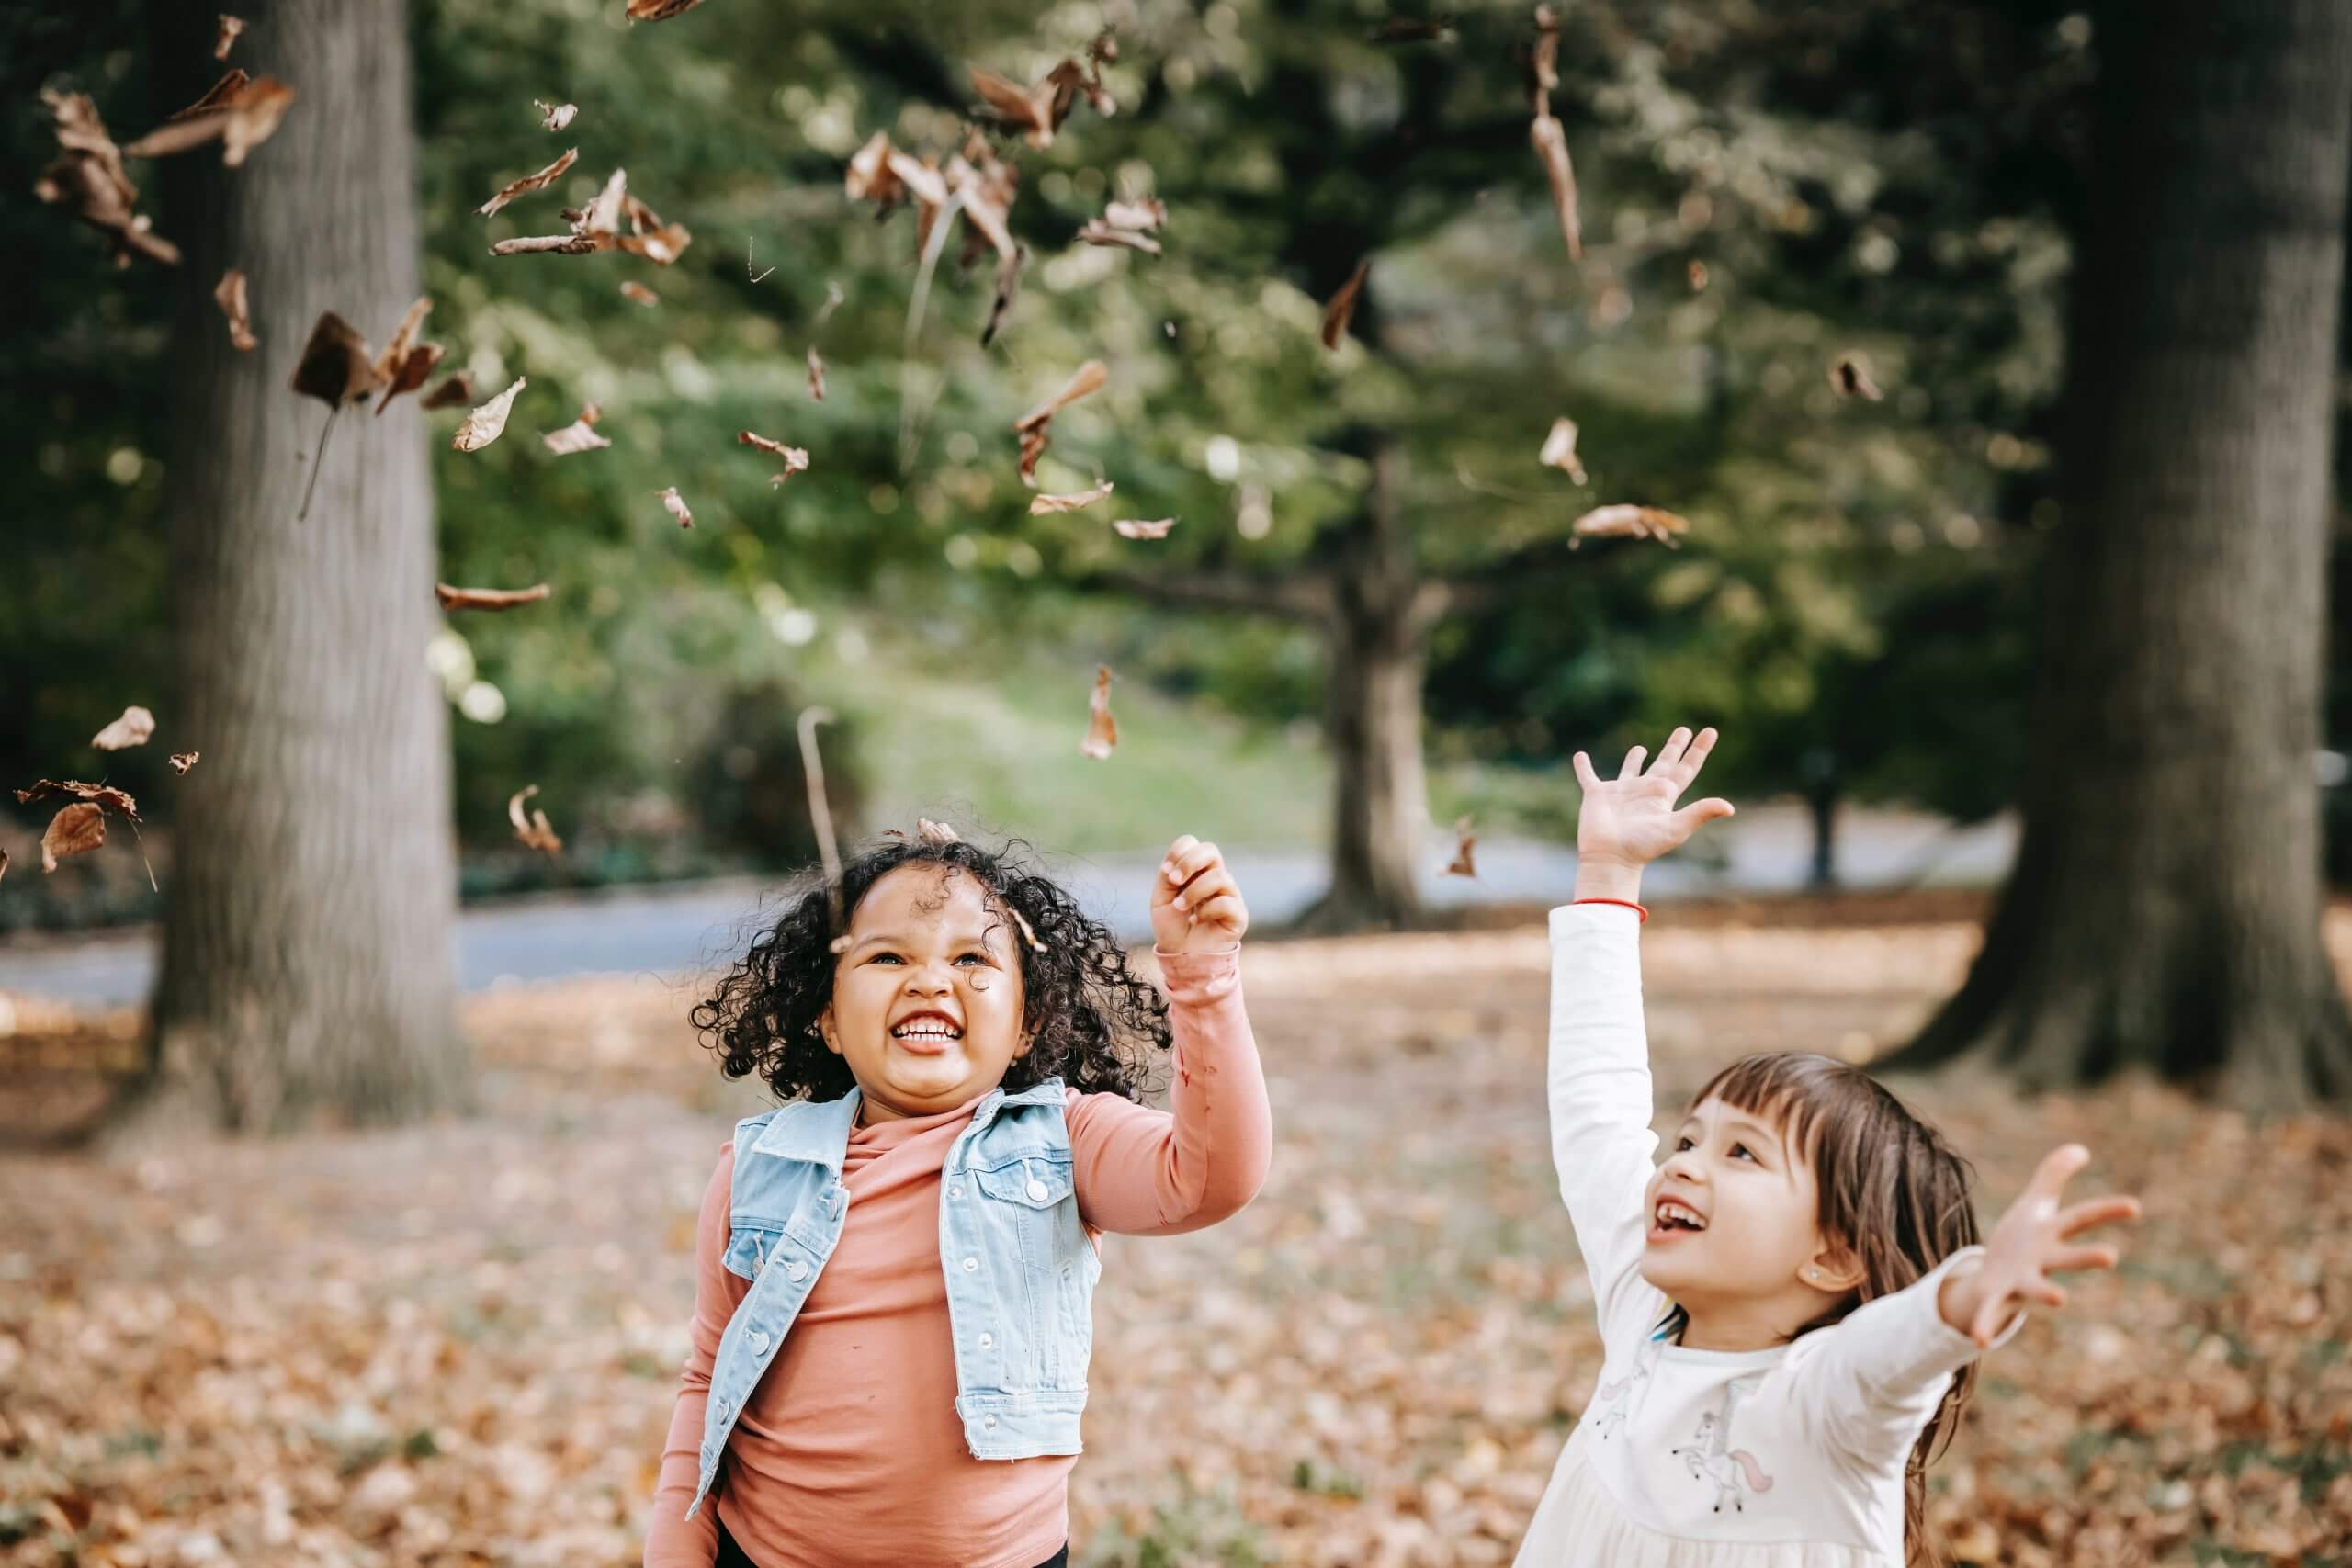 21 Fun Fall Activities To Support Therapy Goals